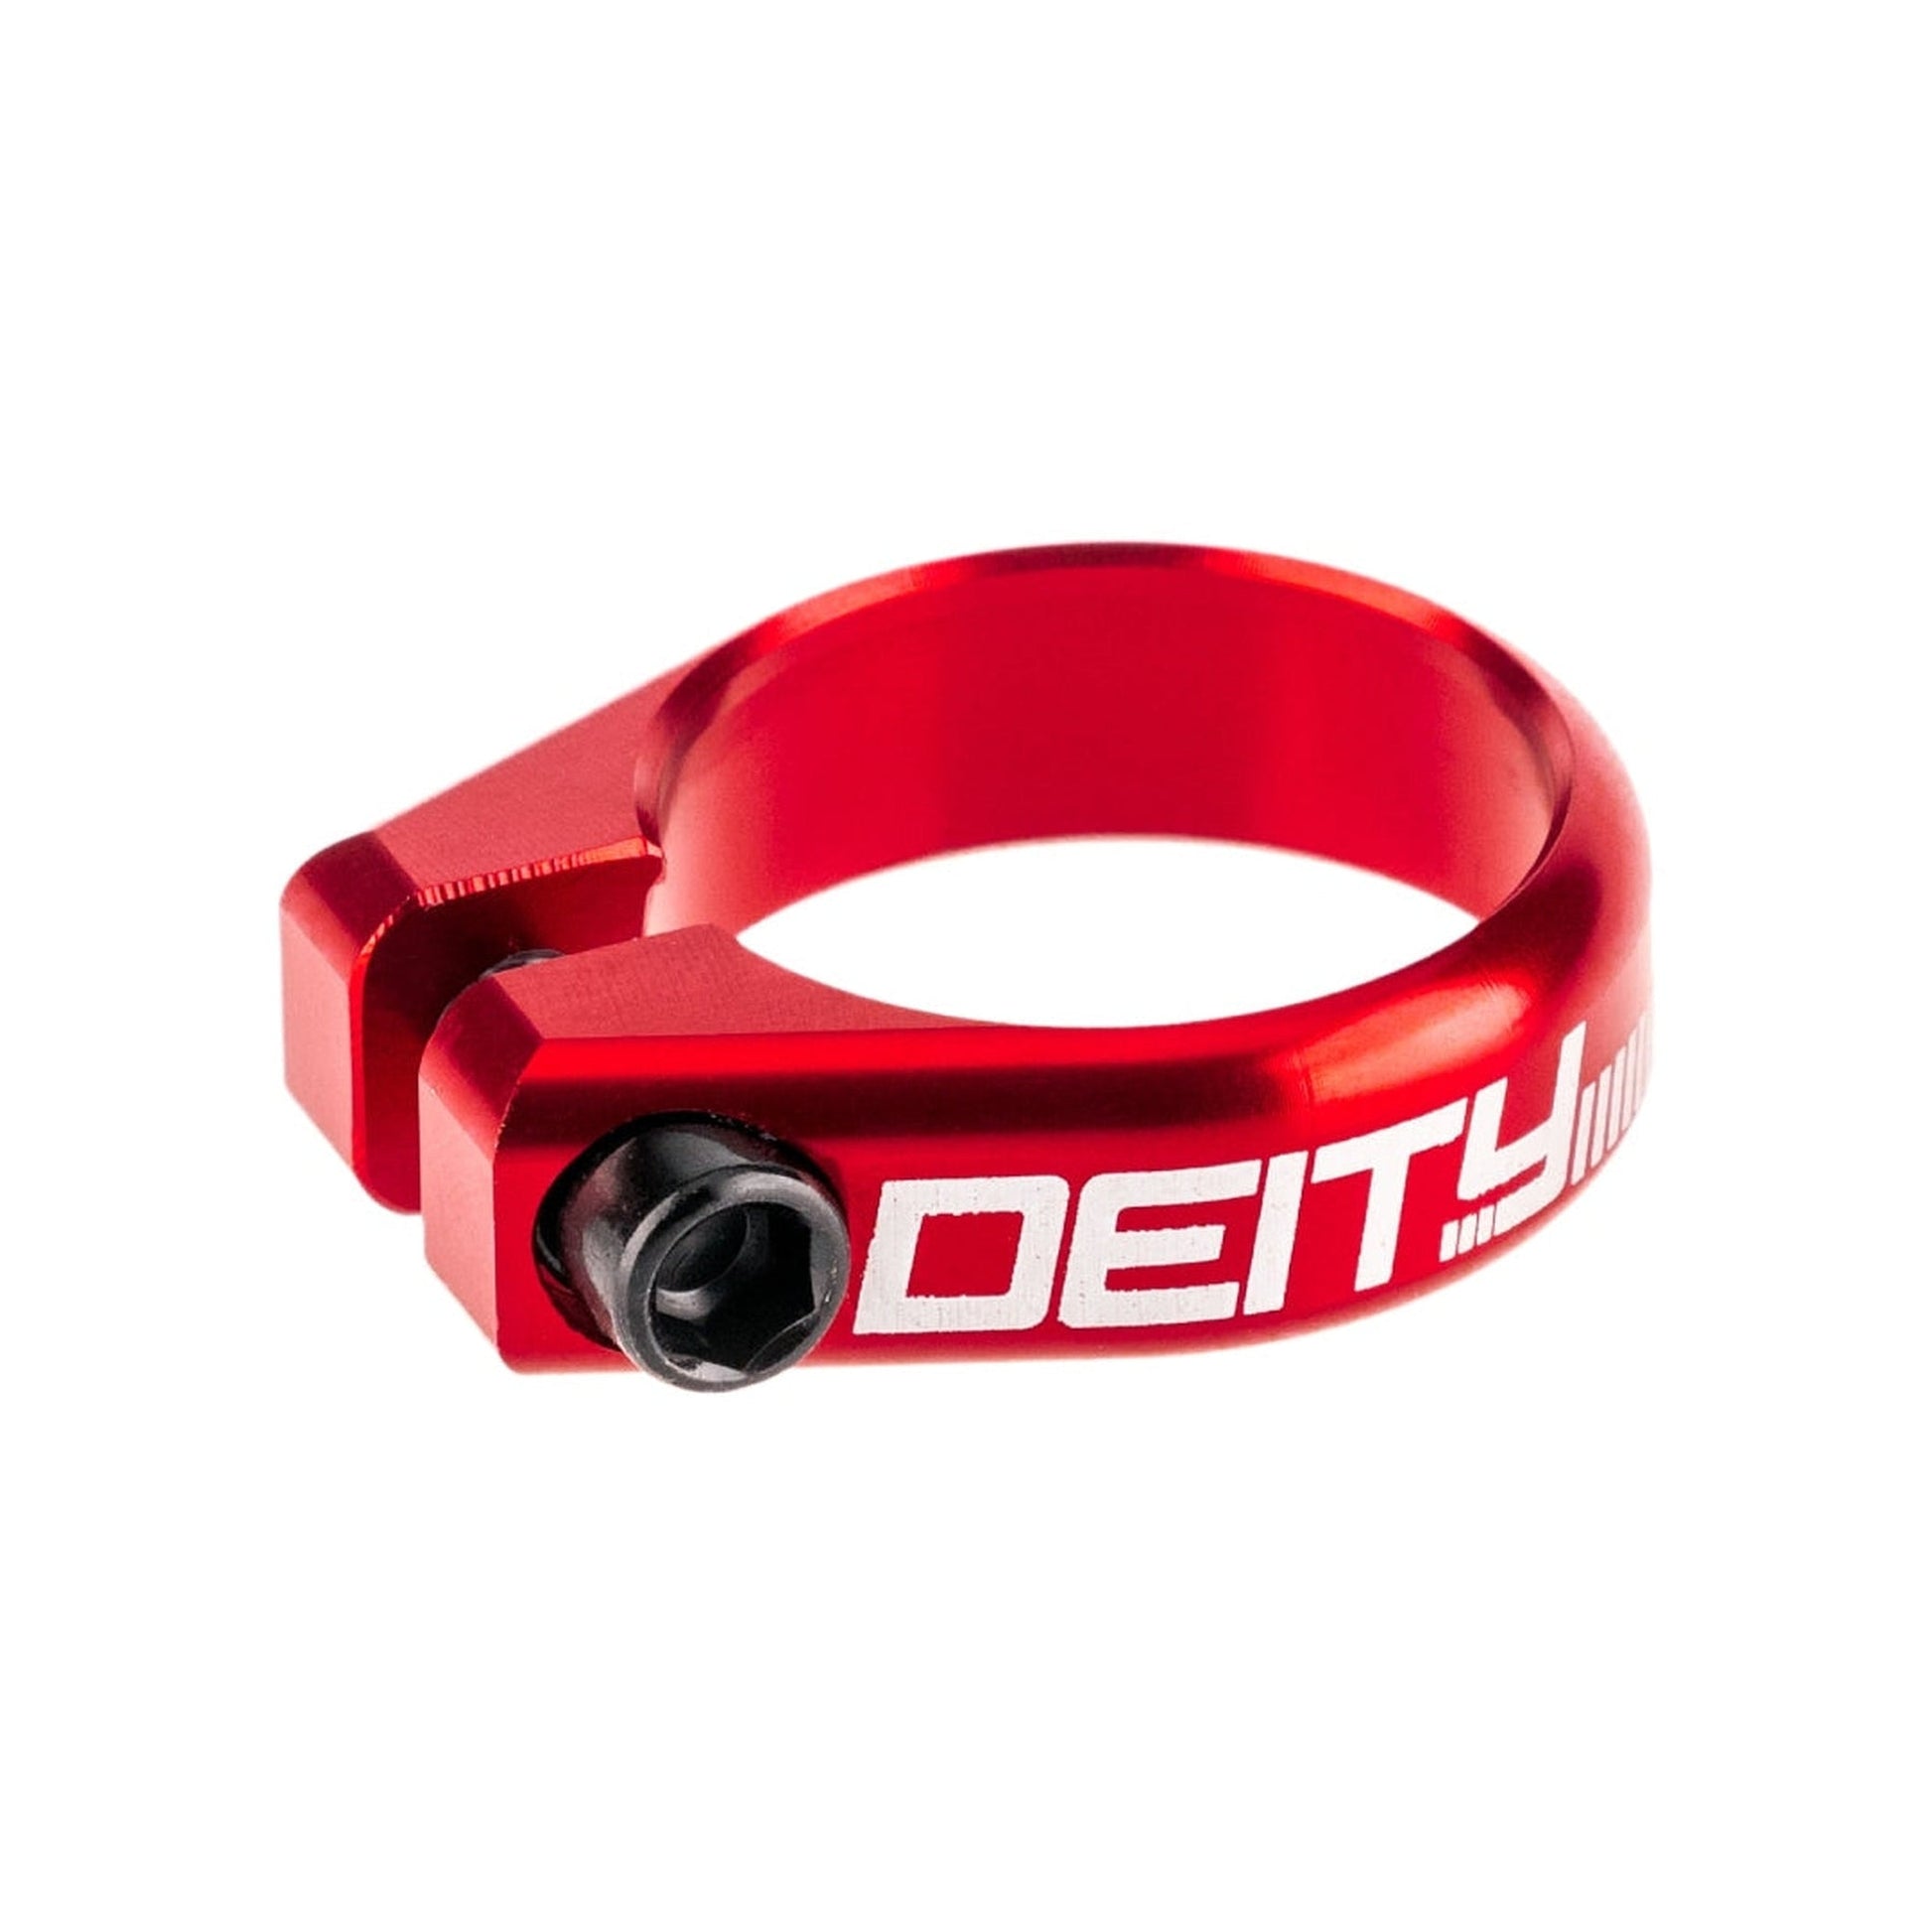 Deity Seatpost Clamps-Cycles Direct Specialized